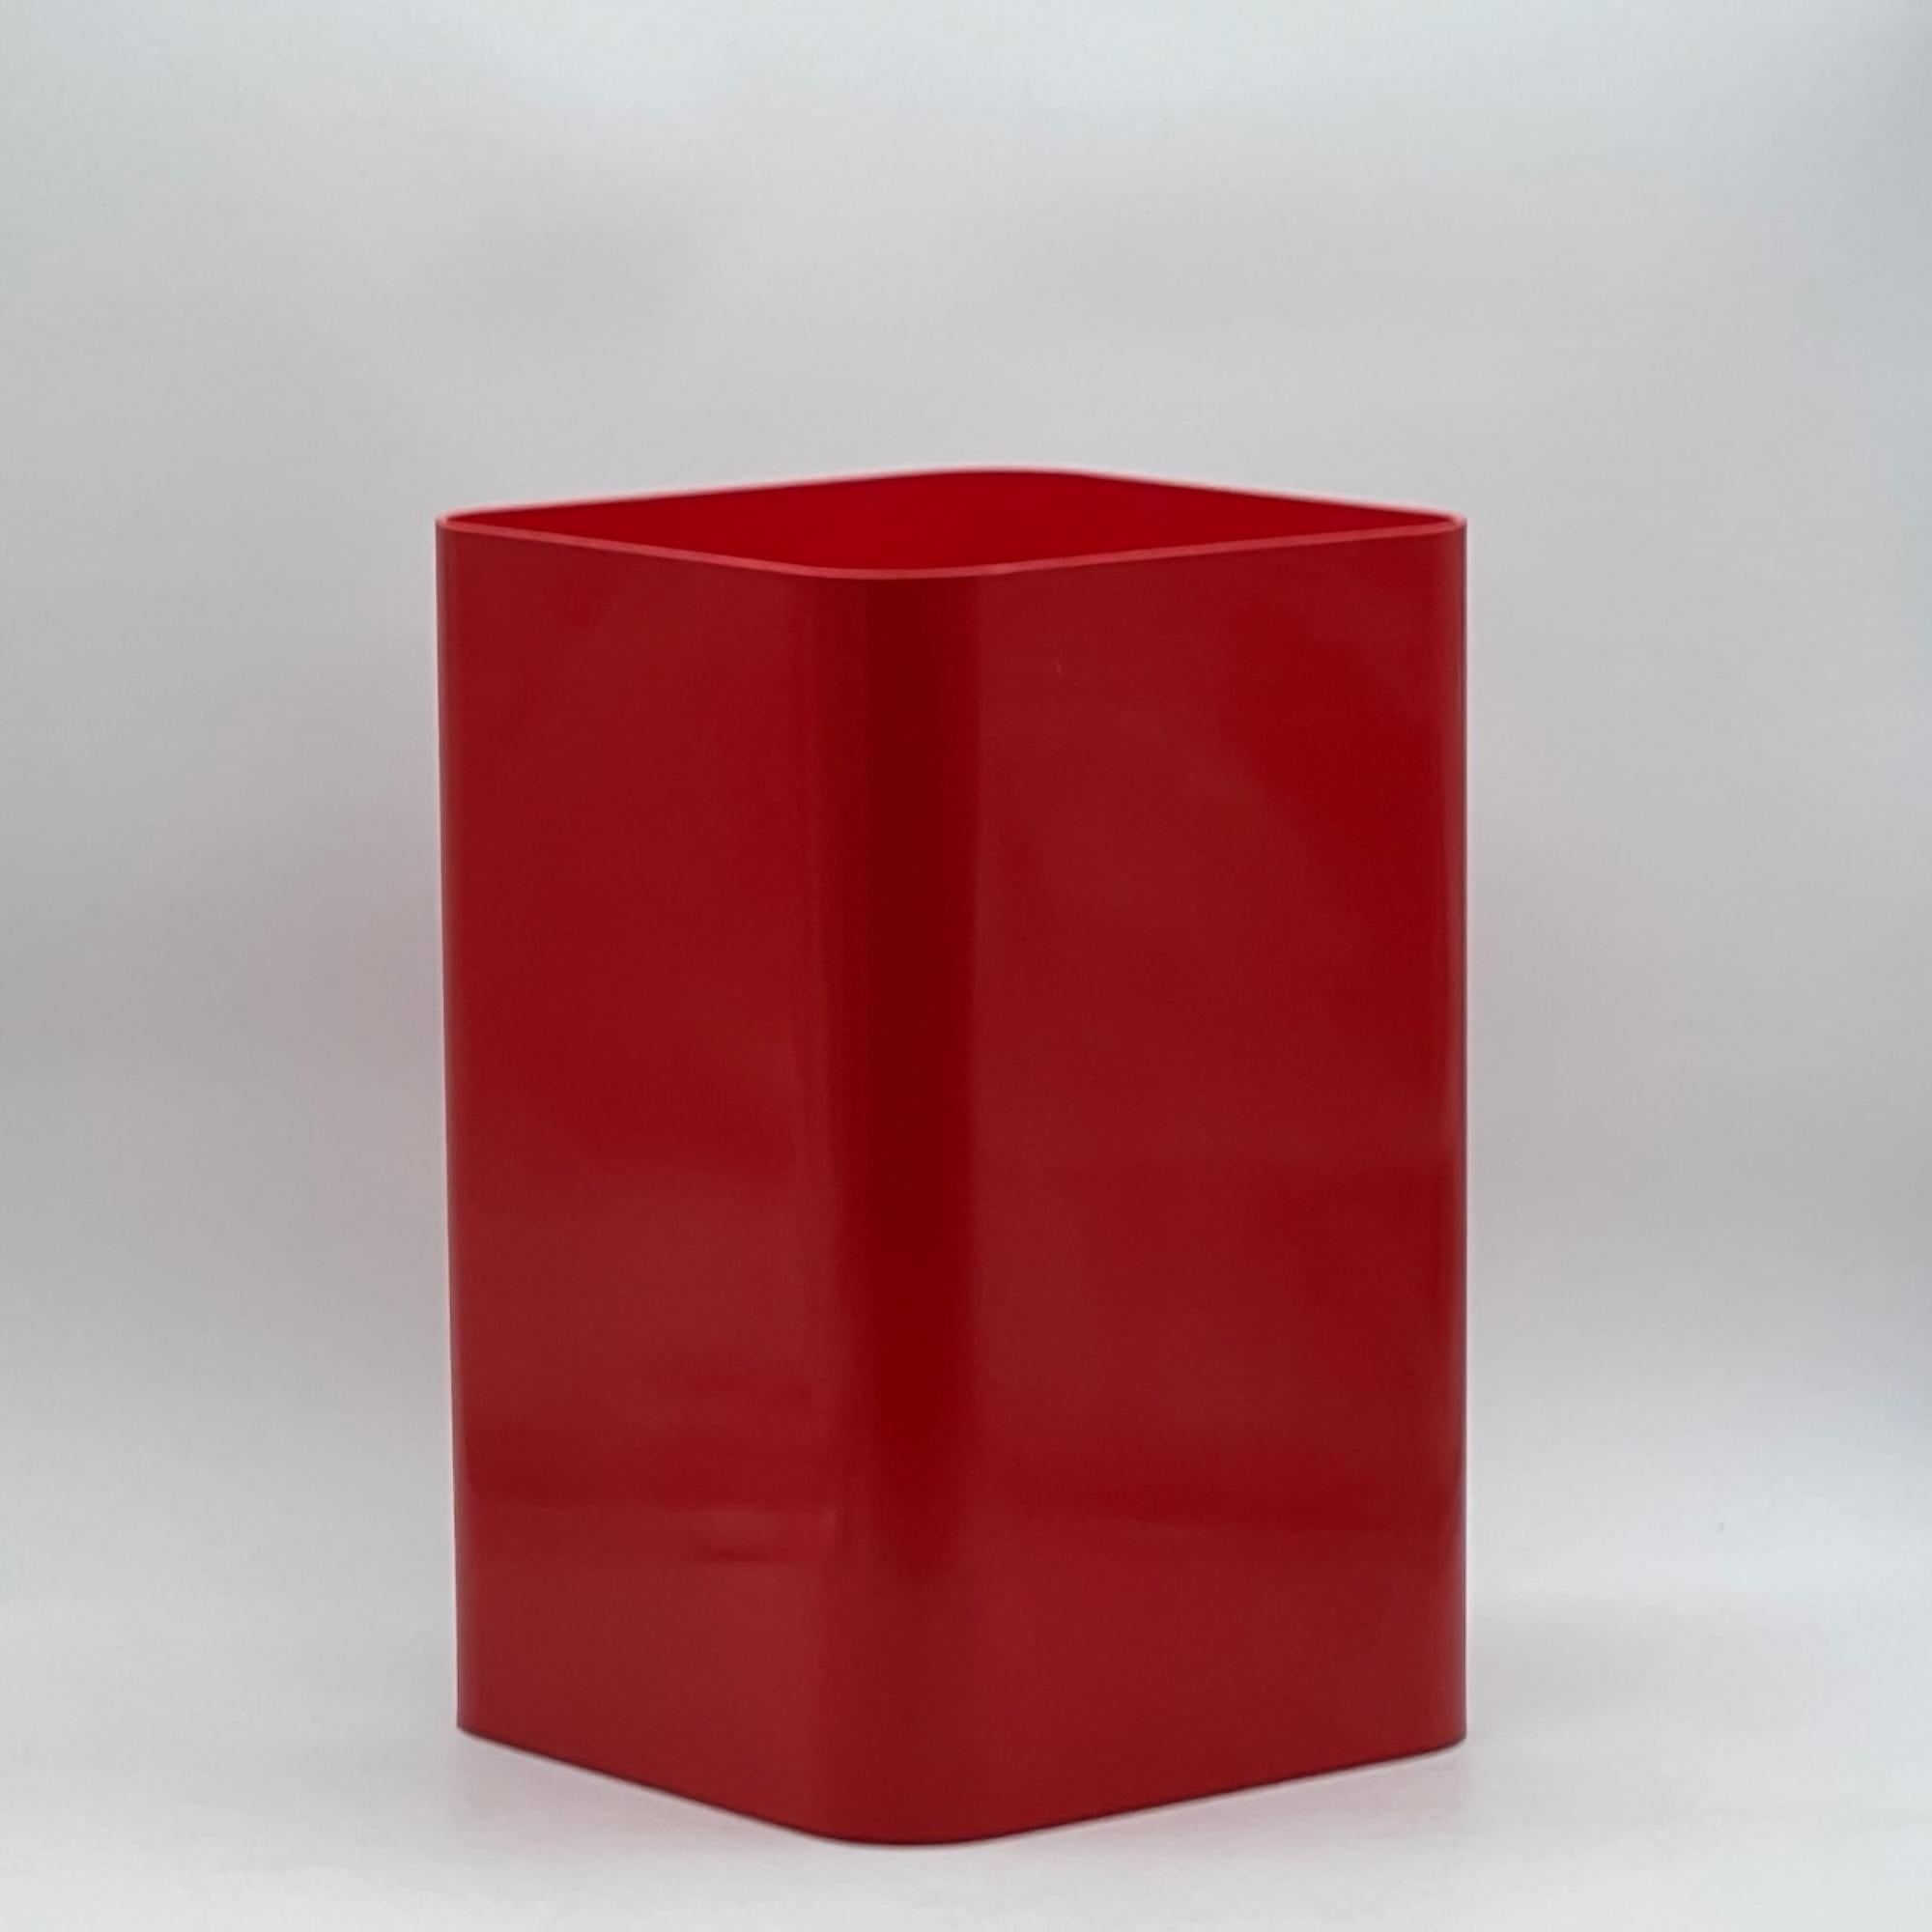 Kartell 4672: Iconic 70s Paper Basket by Ufficio Tecnico-Vibrant Red Glossy  3